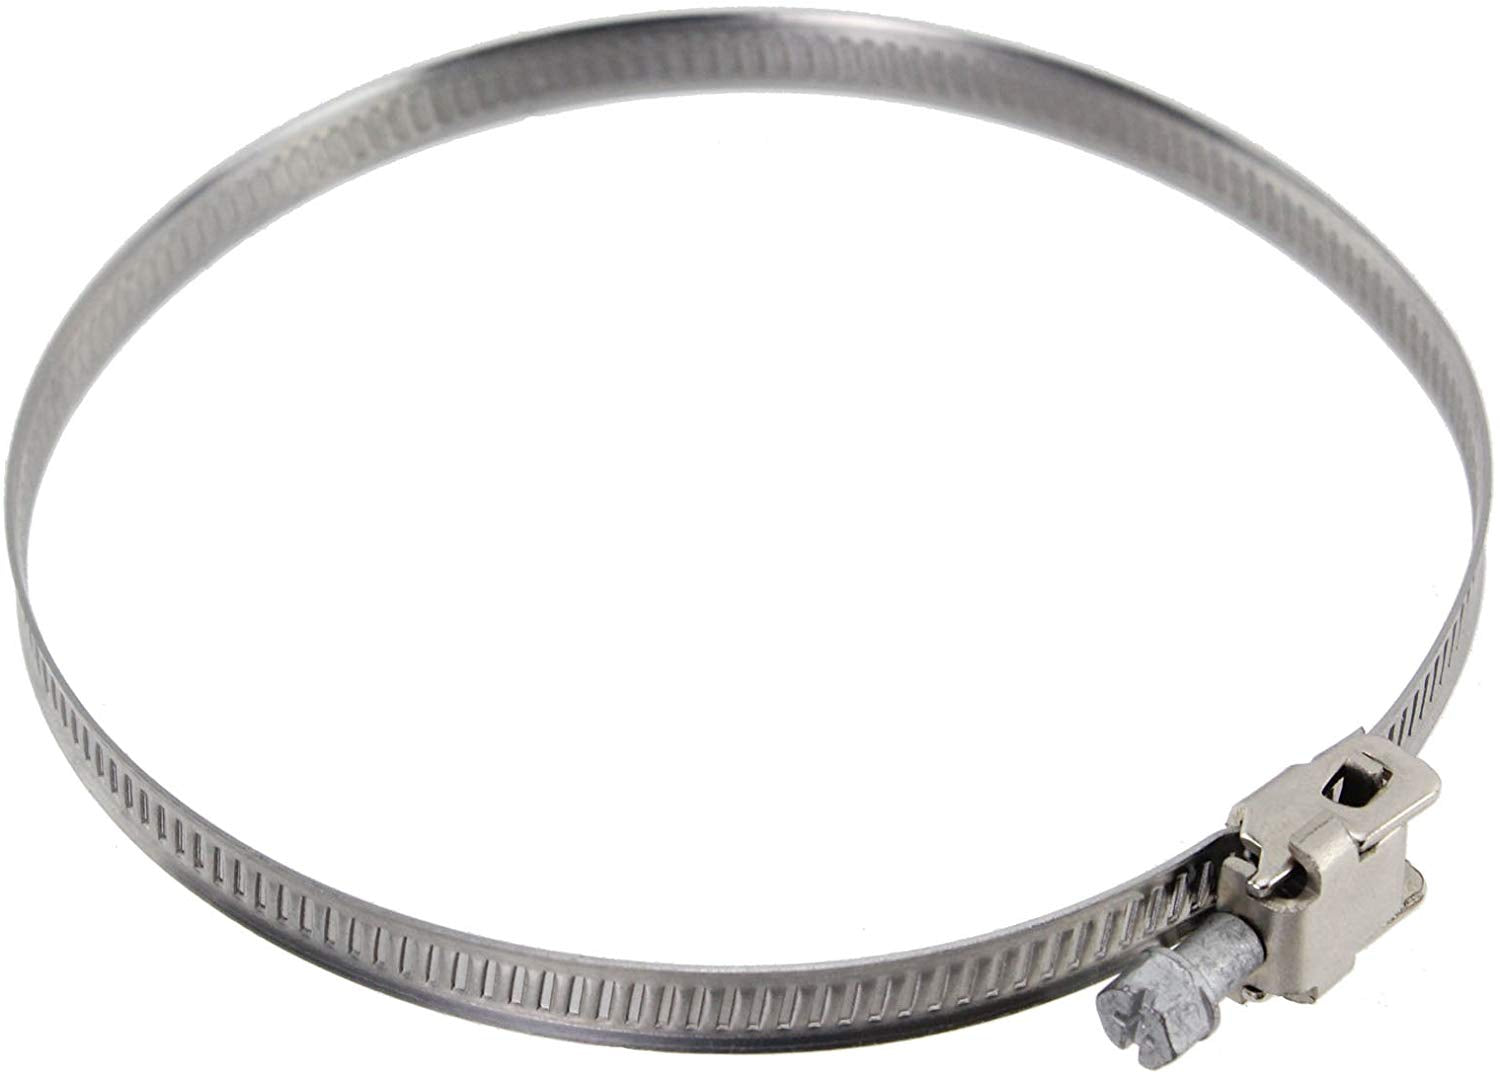 Condenser Box & Extra Long Hose Kit With Connection Ring for Bush Tumble Dryer (4" / 100mm Diameter / 6M Hose)